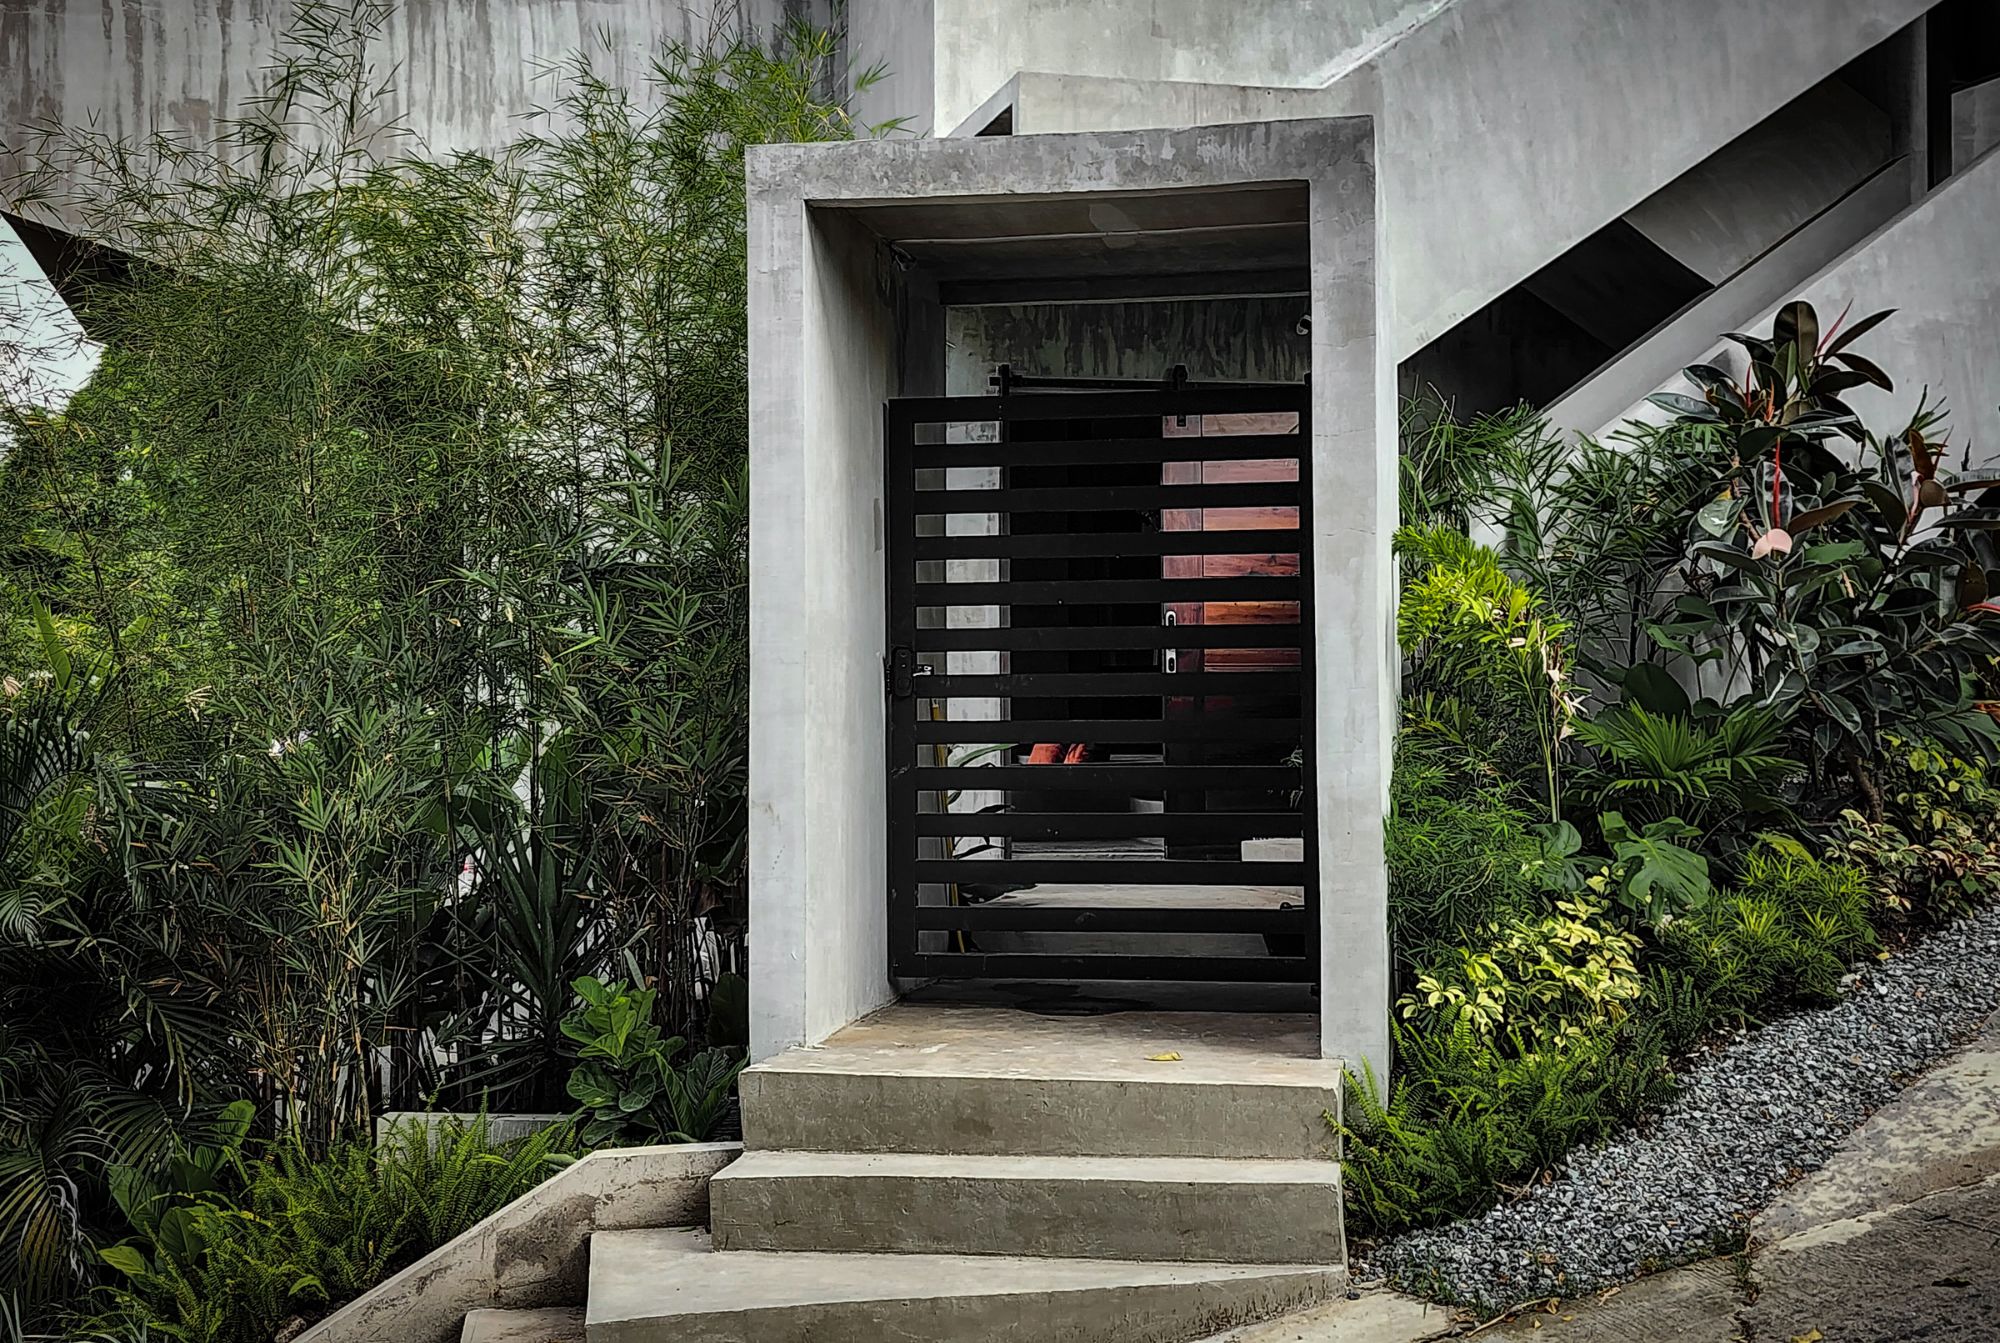 the entrance to Casa Borbon, vacation villa in the style of tropical brutalism.